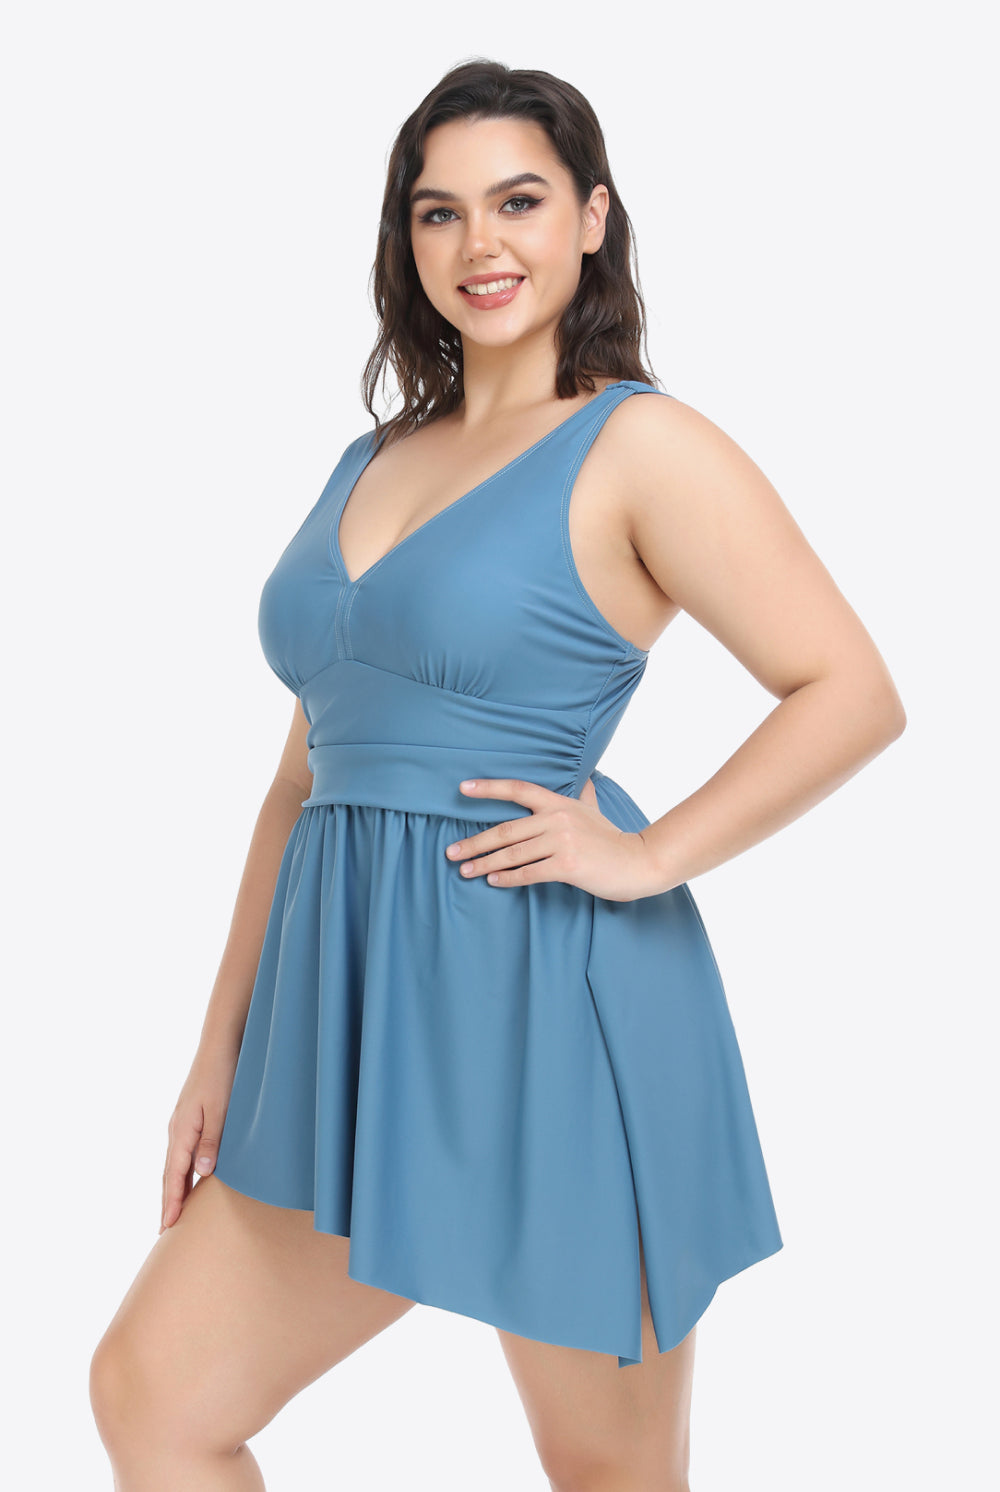 Slate Gray Plus Size Plunge Sleeveless Two-Piece Swimsuit Plus Size Clothes